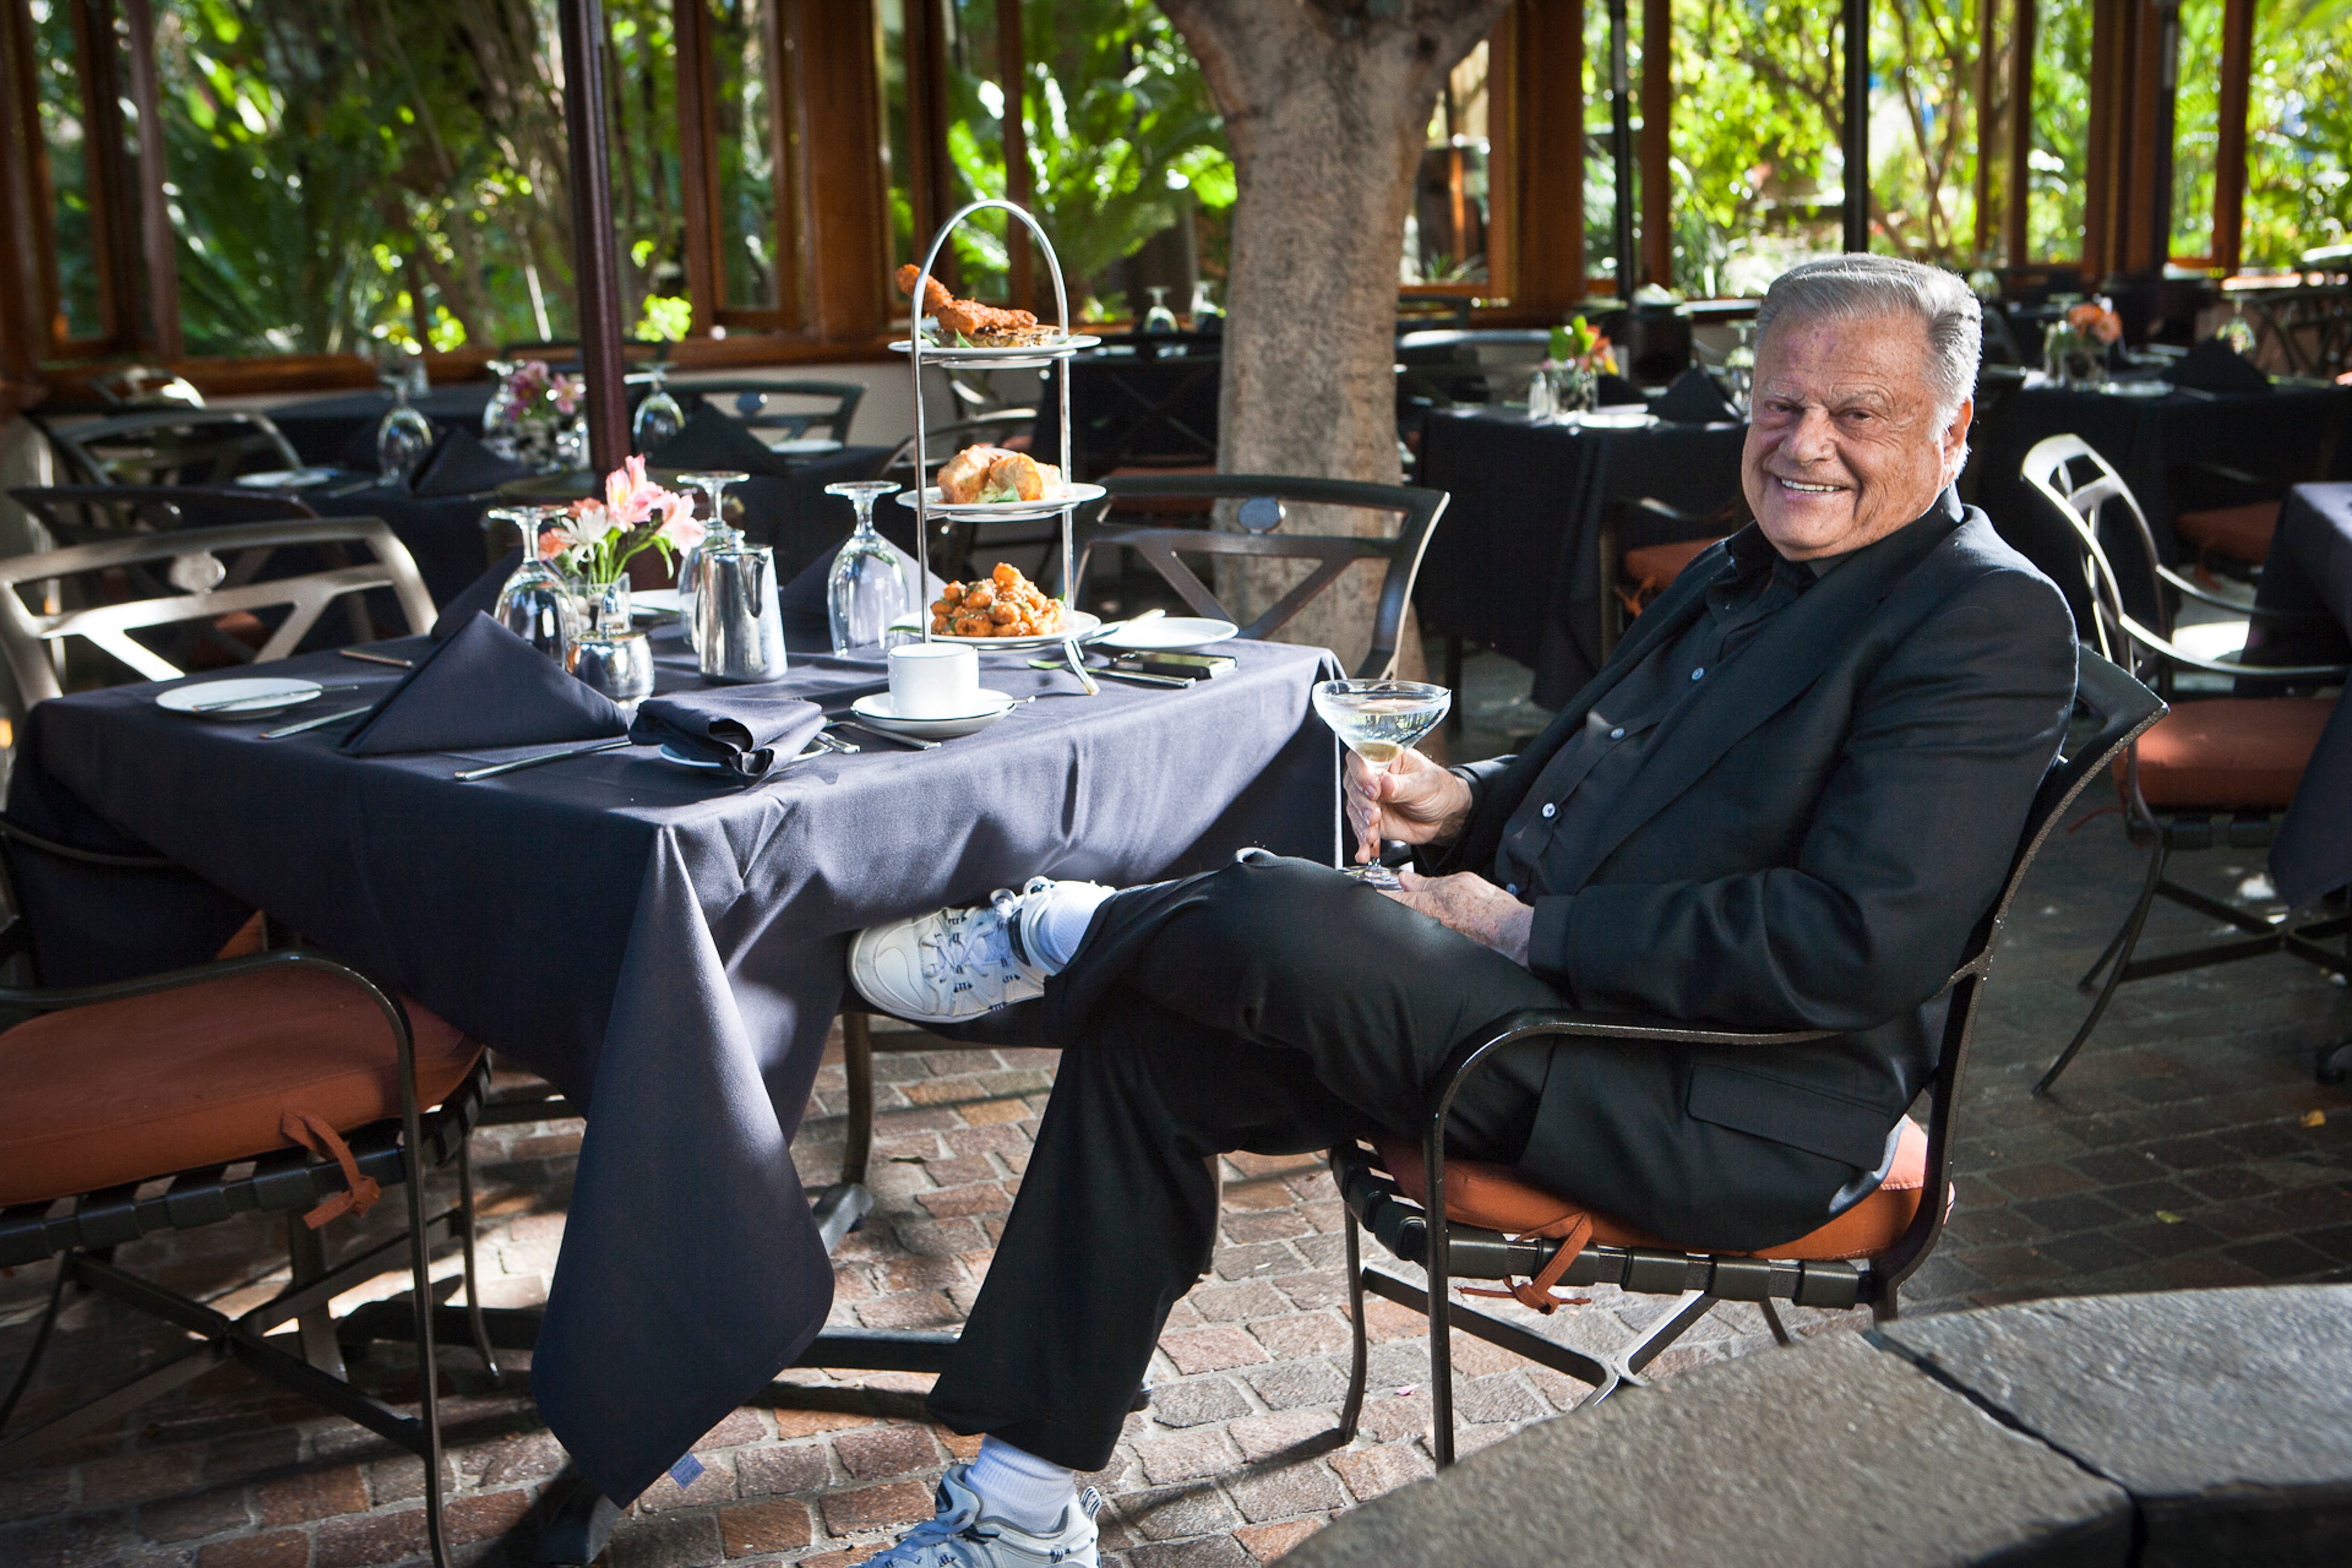 Harold Matzner, philanthropist and owner of Spencer’s Restaurant, enjoying a cocktail on the patio.